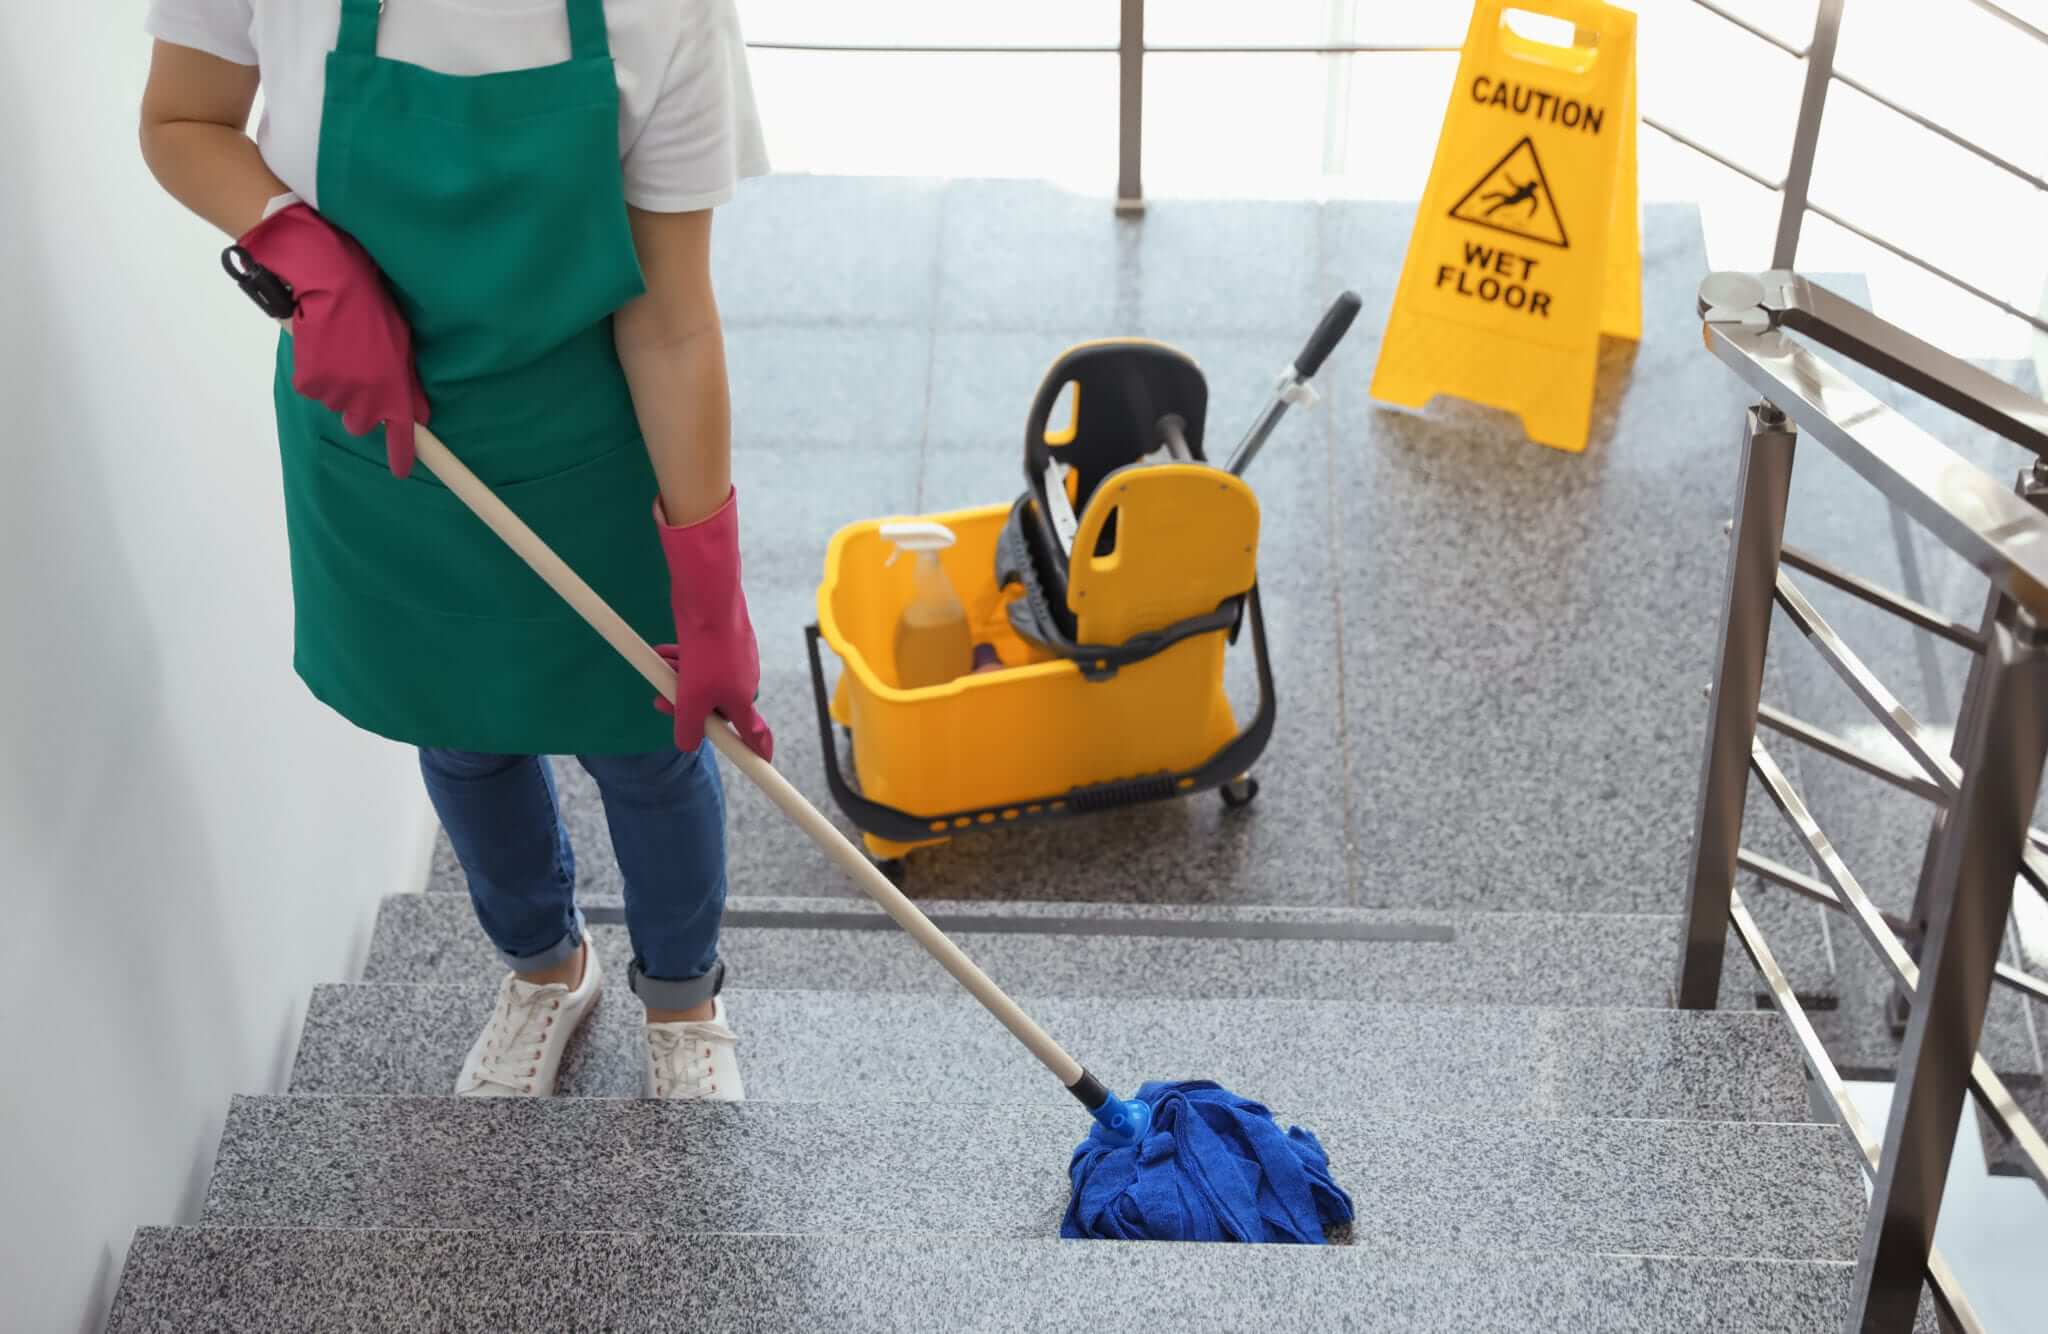 https://thearchitecturedesigns.com/wp-content/uploads/2020/06/janitorial-cleaning-2.jpg